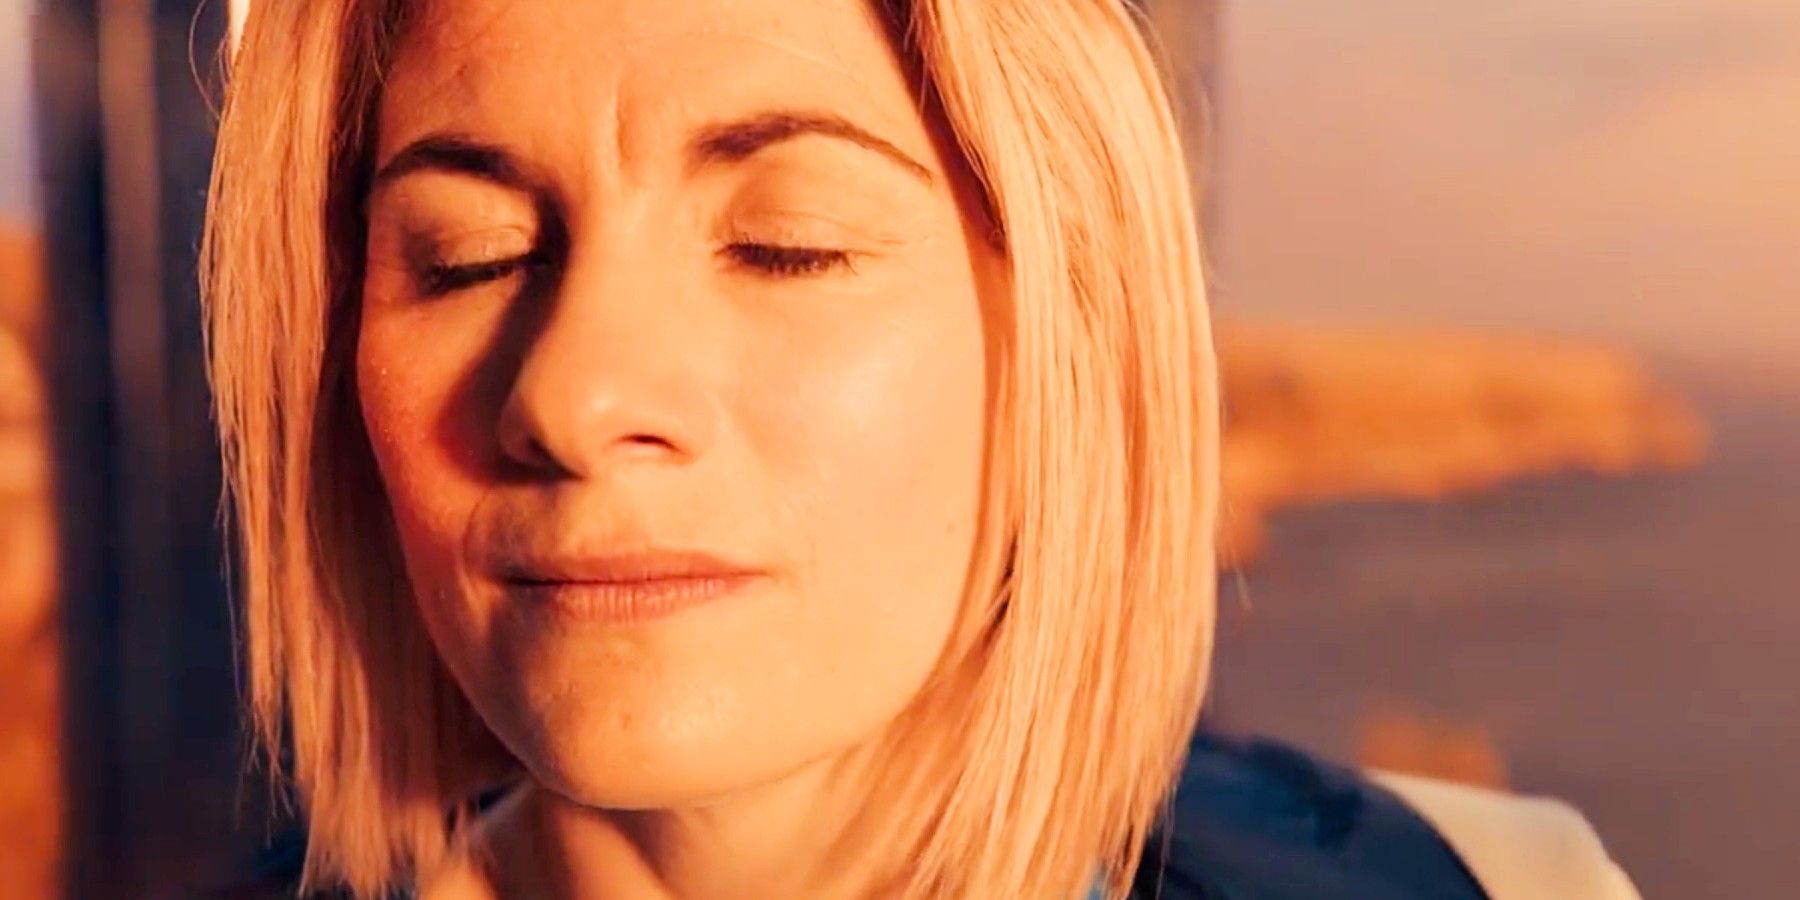 Jodie Whittaker says goodbye in Doctor Who